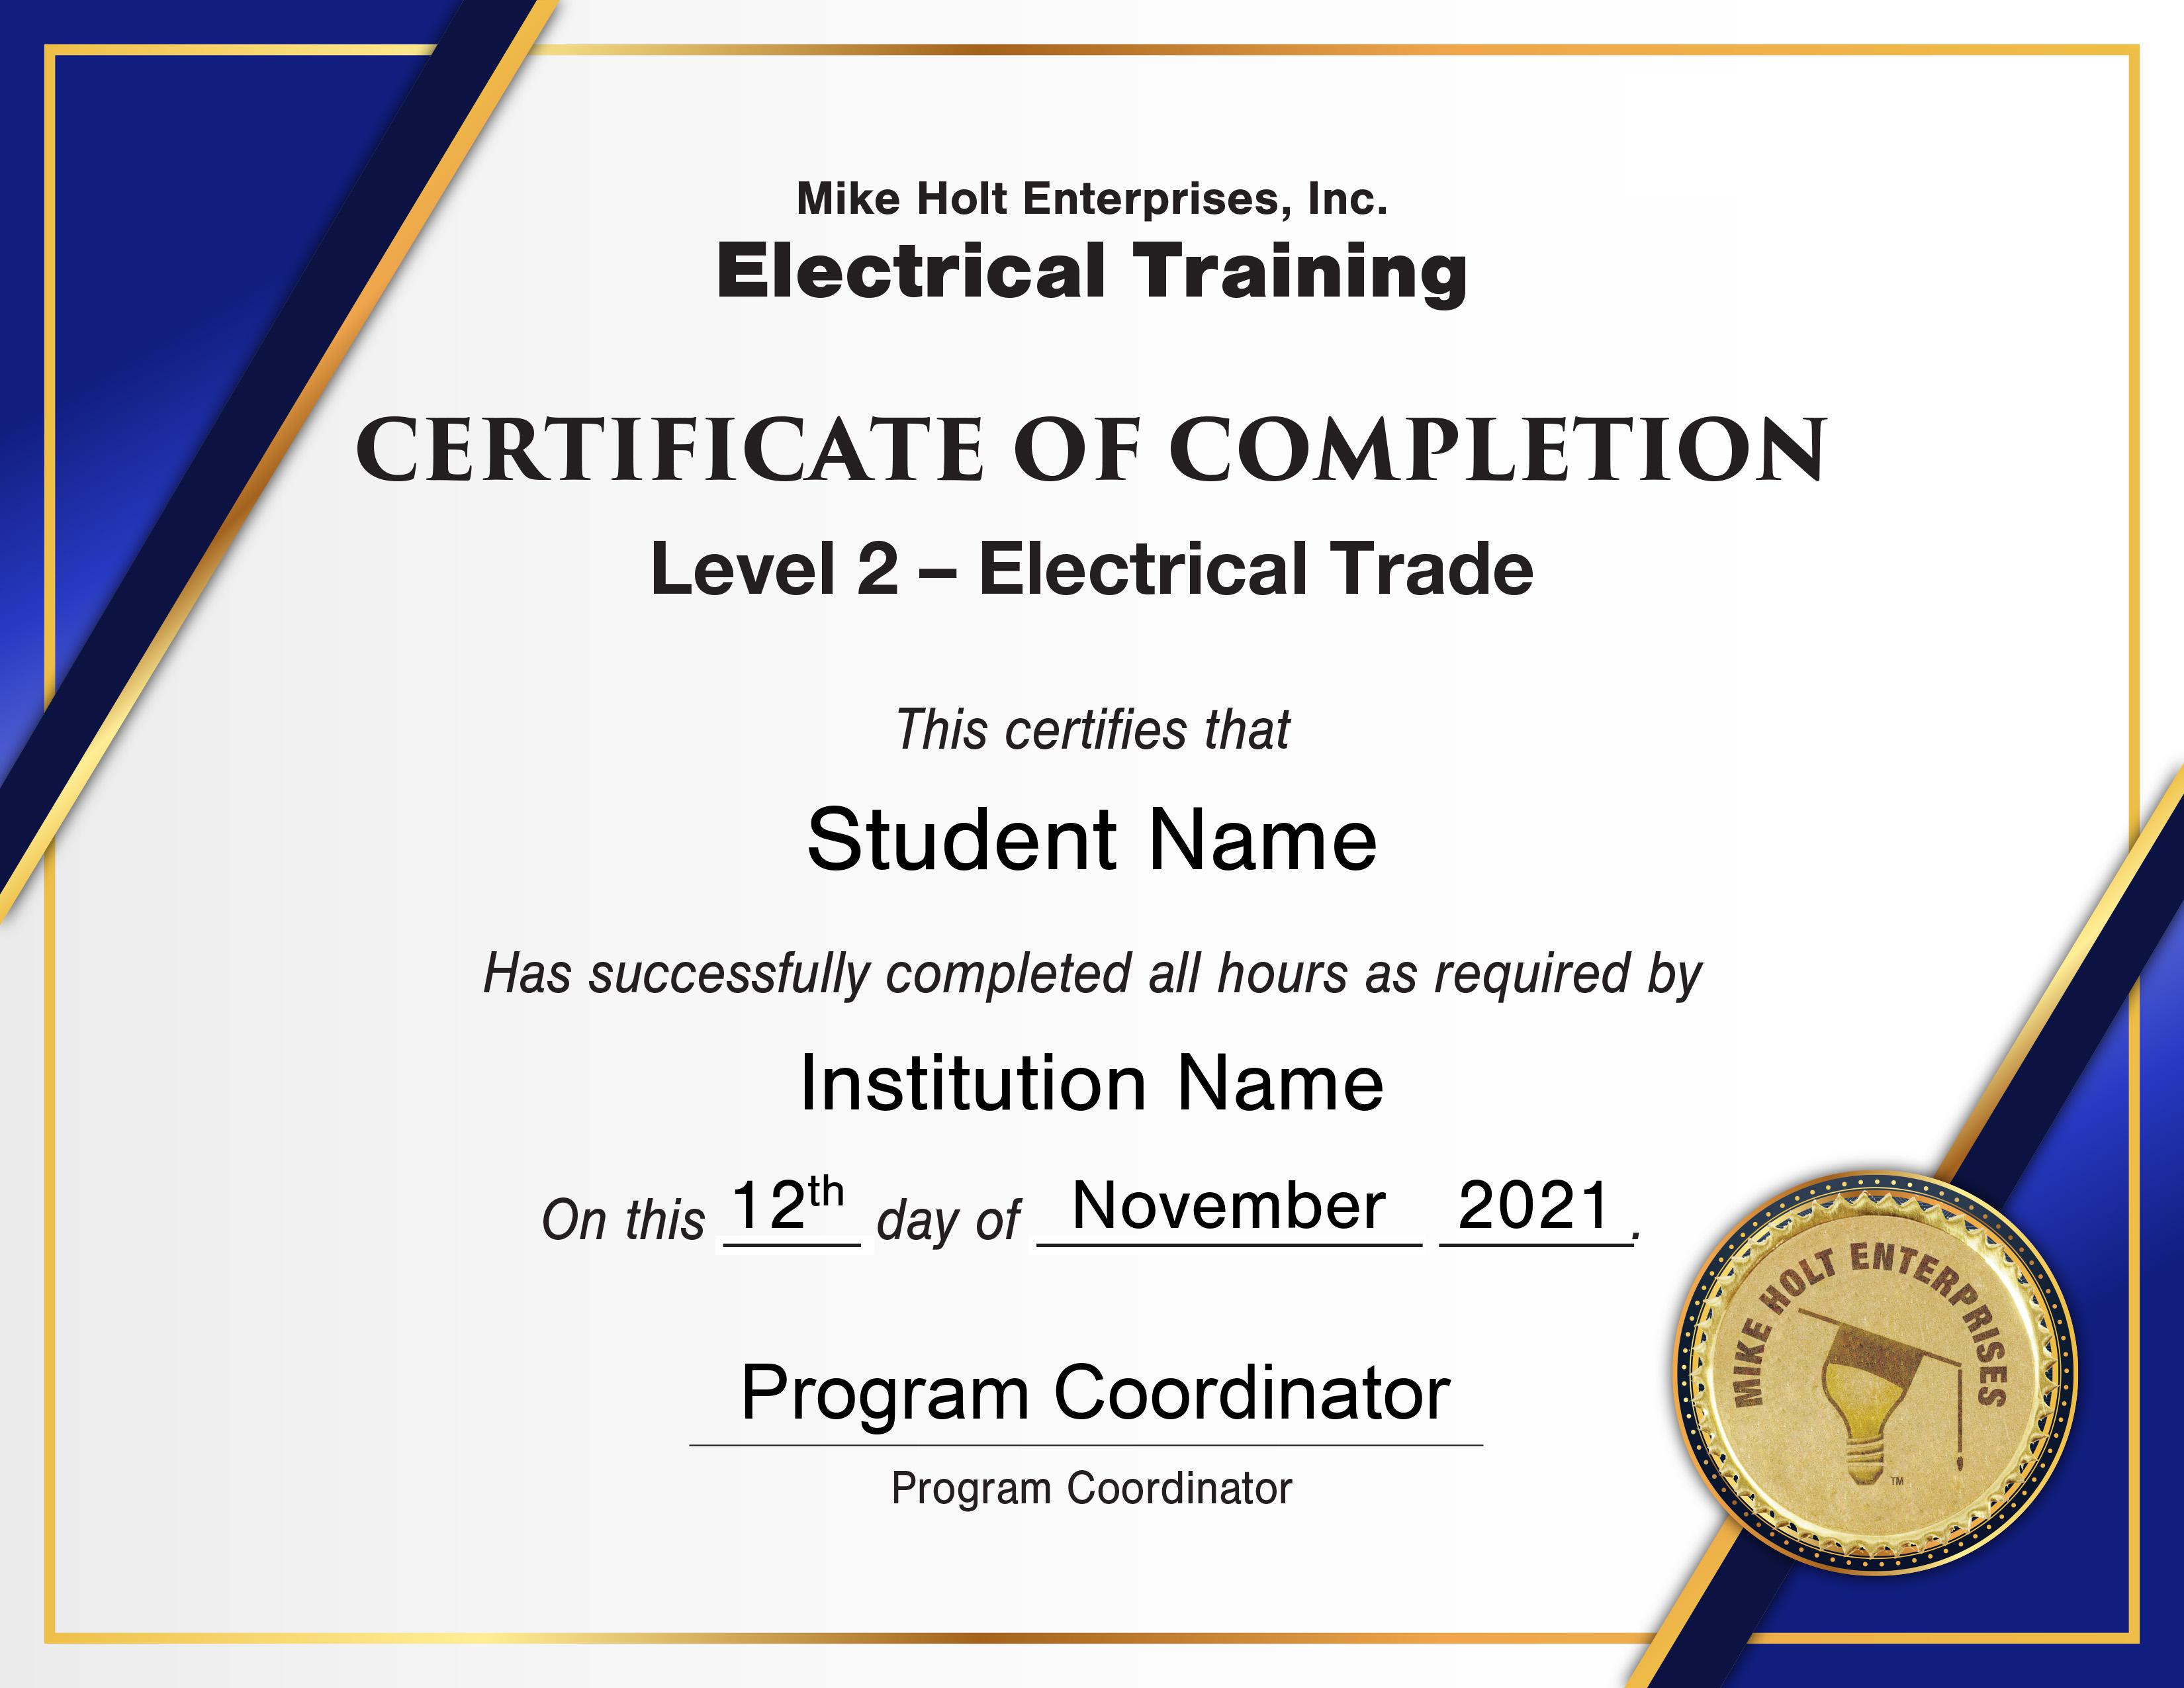 Certificate of Completion for Level 2